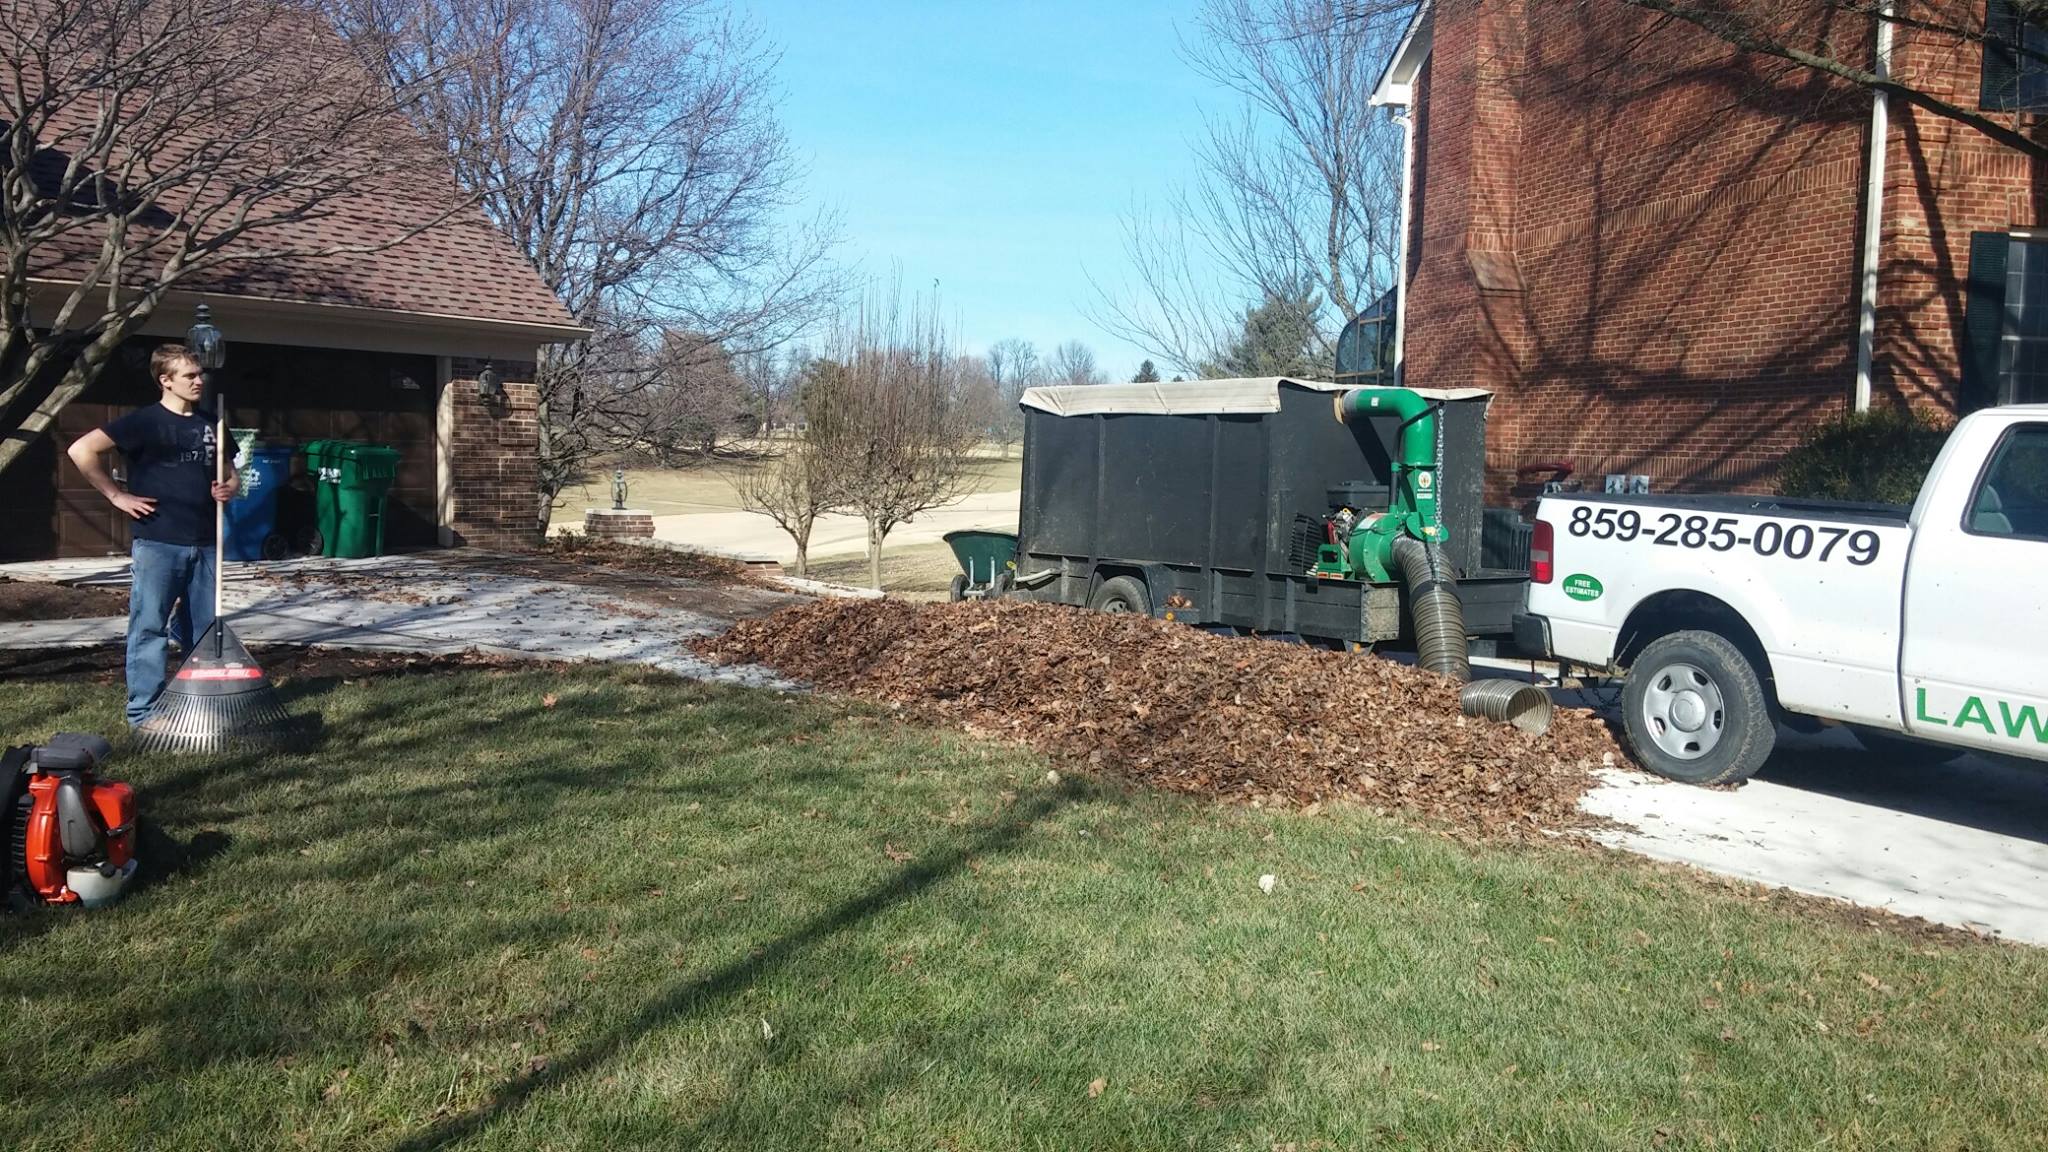 What Services Does The Landscaping Company Offer, And What Specific Landscaping Tasks Can They Assist With?